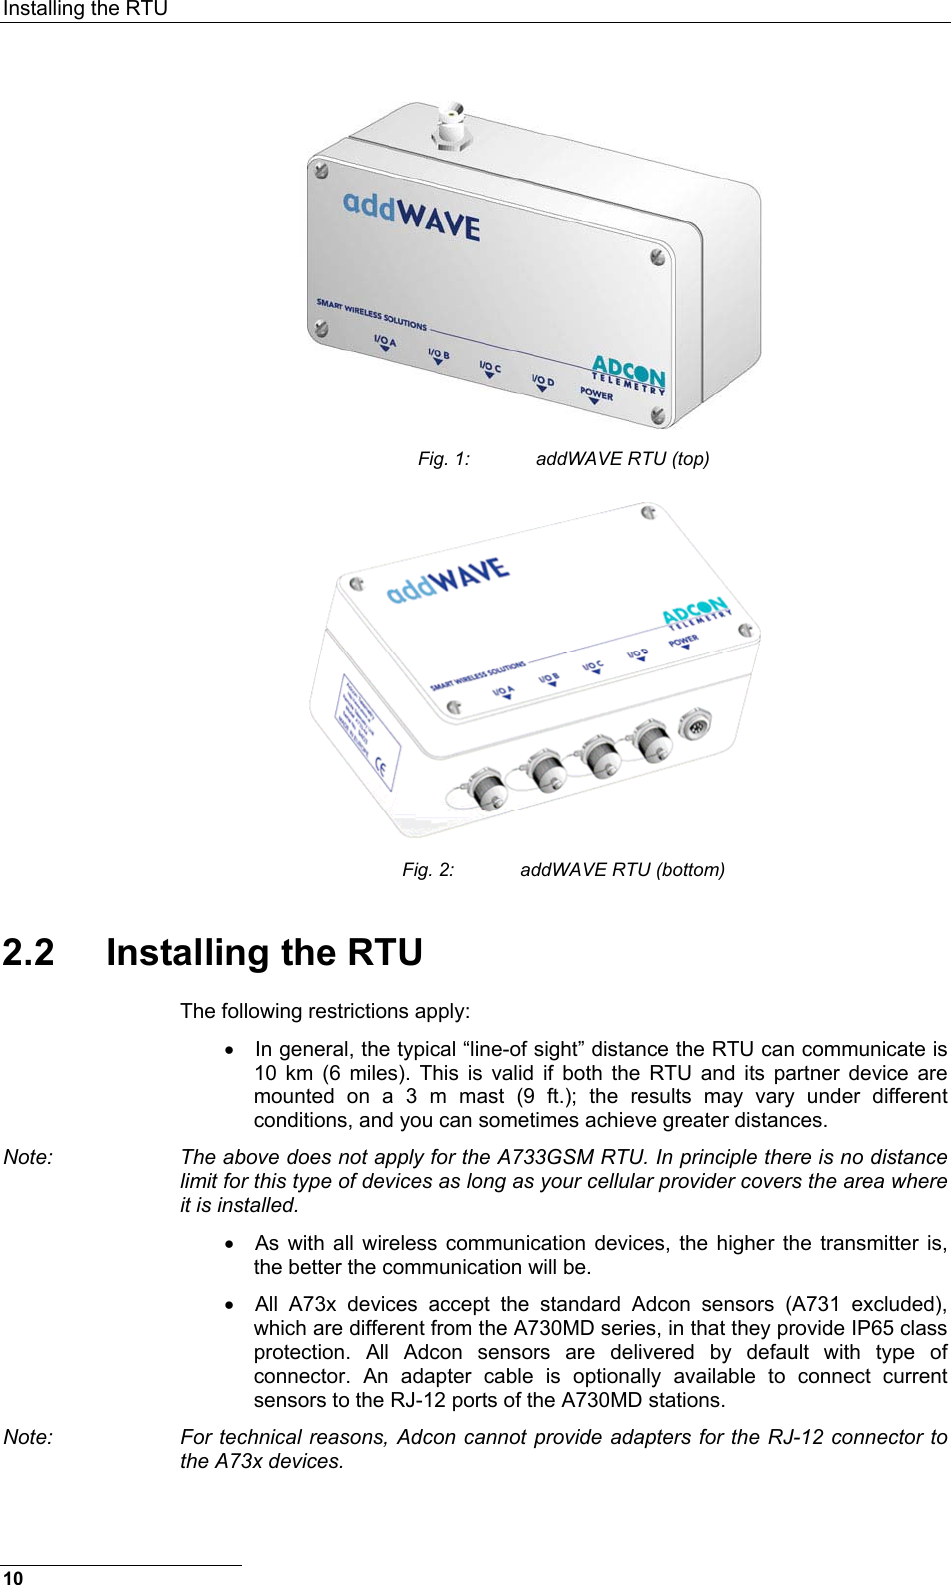 Installing the RTU   Fig. 1:  addWAVE RTU (top)  Fig. 2:  addWAVE RTU (bottom) 2.2 Installing the RTU The following restrictions apply: •  In general, the typical “line-of sight” distance the RTU can communicate is 10 km (6 miles). This is valid if both the RTU and its partner device are mounted on a 3 m mast (9 ft.); the results may vary under different conditions, and you can sometimes achieve greater distances. Note:  The above does not apply for the A733GSM RTU. In principle there is no distance limit for this type of devices as long as your cellular provider covers the area where it is installed. •  As with all wireless communication devices, the higher the transmitter is, the better the communication will be. •  All A73x devices accept the standard Adcon sensors (A731 excluded), which are different from the A730MD series, in that they provide IP65 class protection. All Adcon sensors are delivered by default with type of connector. An adapter cable is optionally available to connect current sensors to the RJ-12 ports of the A730MD stations. Note:  For technical reasons, Adcon cannot provide adapters for the RJ-12 connector to the A73x devices. 10 